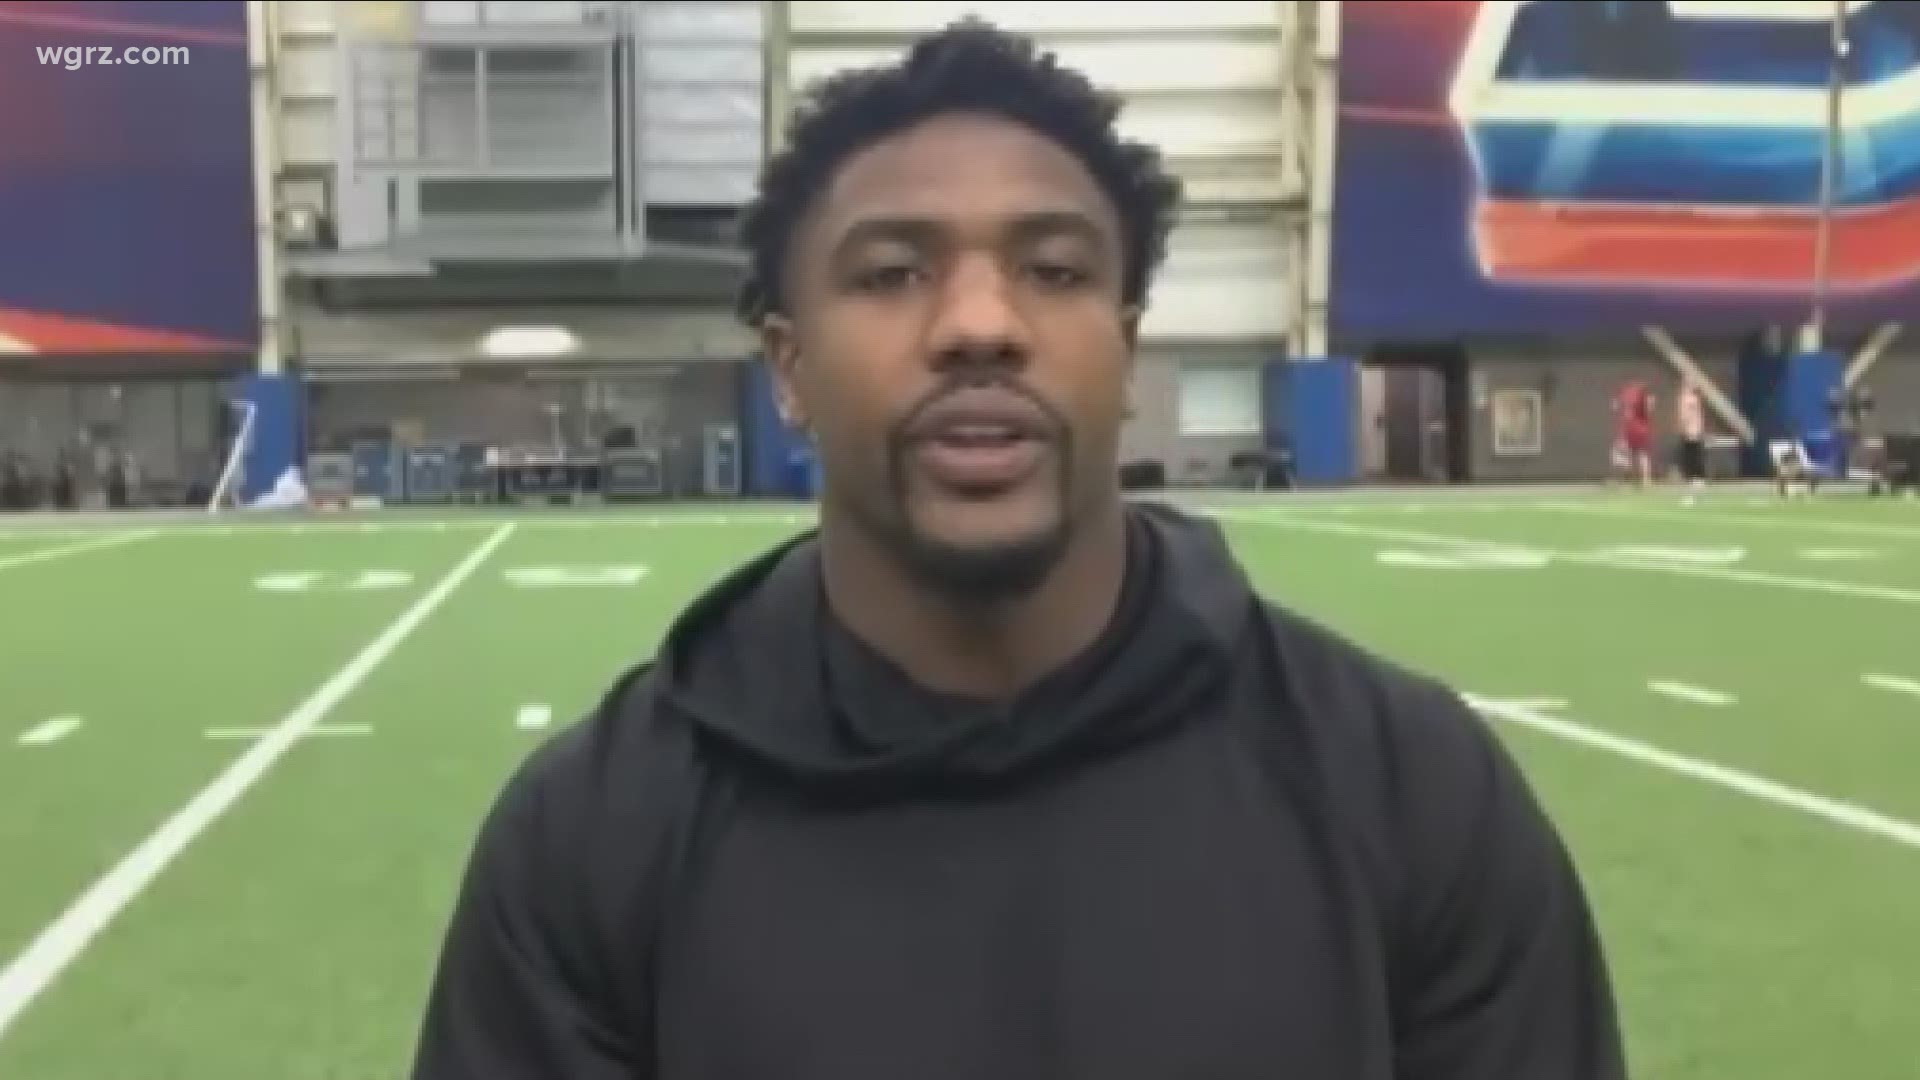 Buffalo Bills Defensive End Jerry Hughes shared a message reminding people to vote.